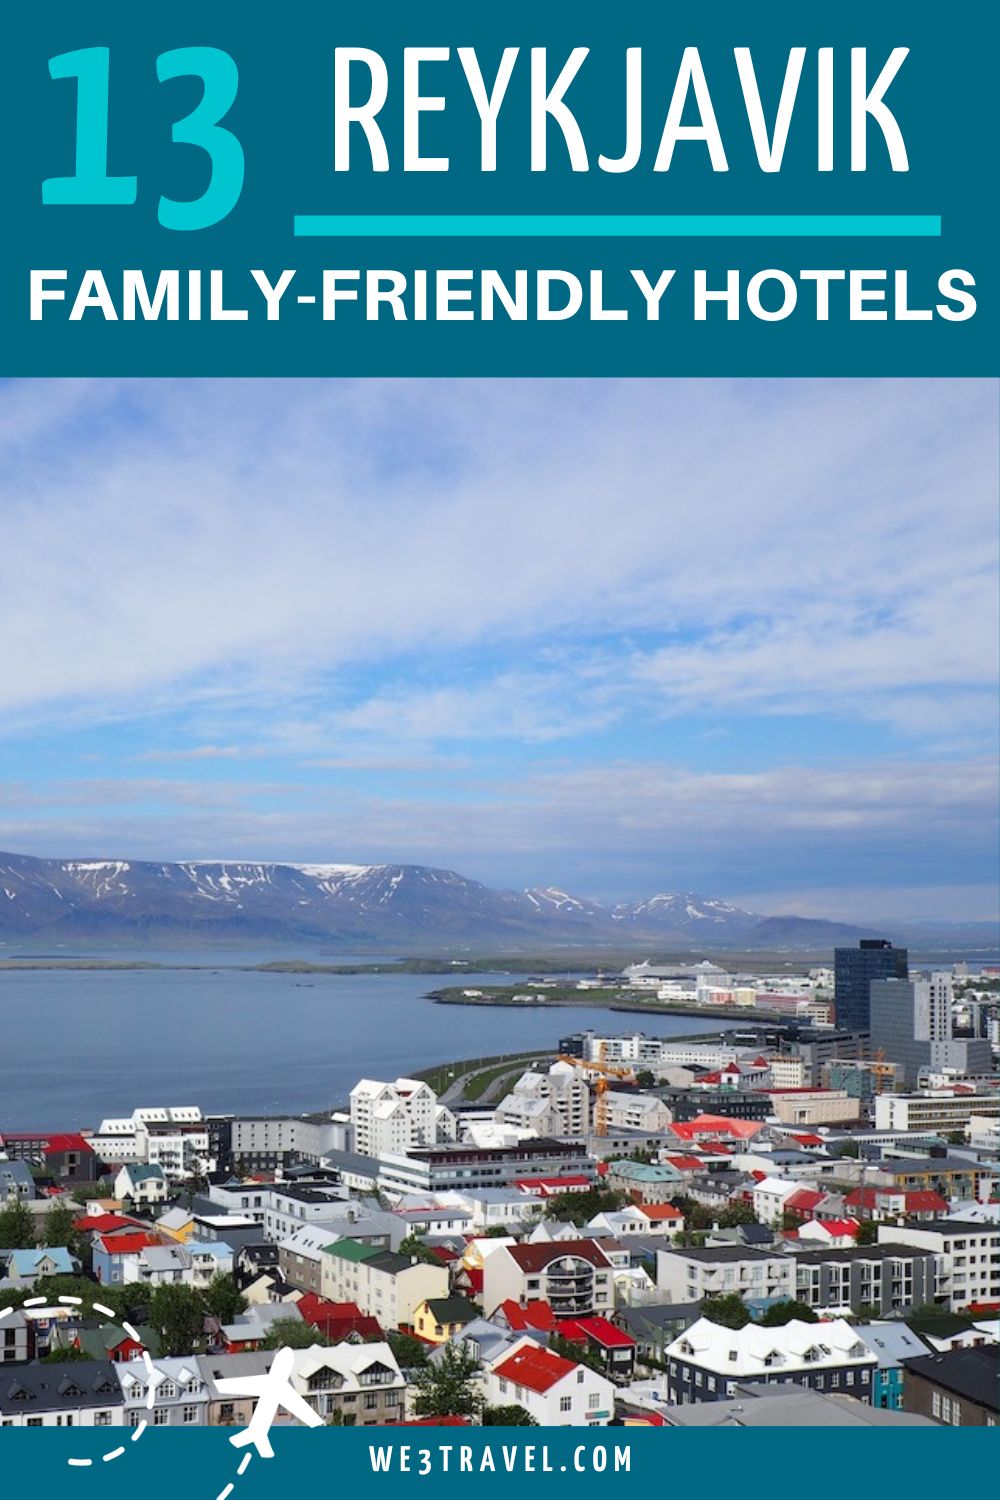 13 Family-friendly Reykjavik hotels where to stay in Reykjavik with kids